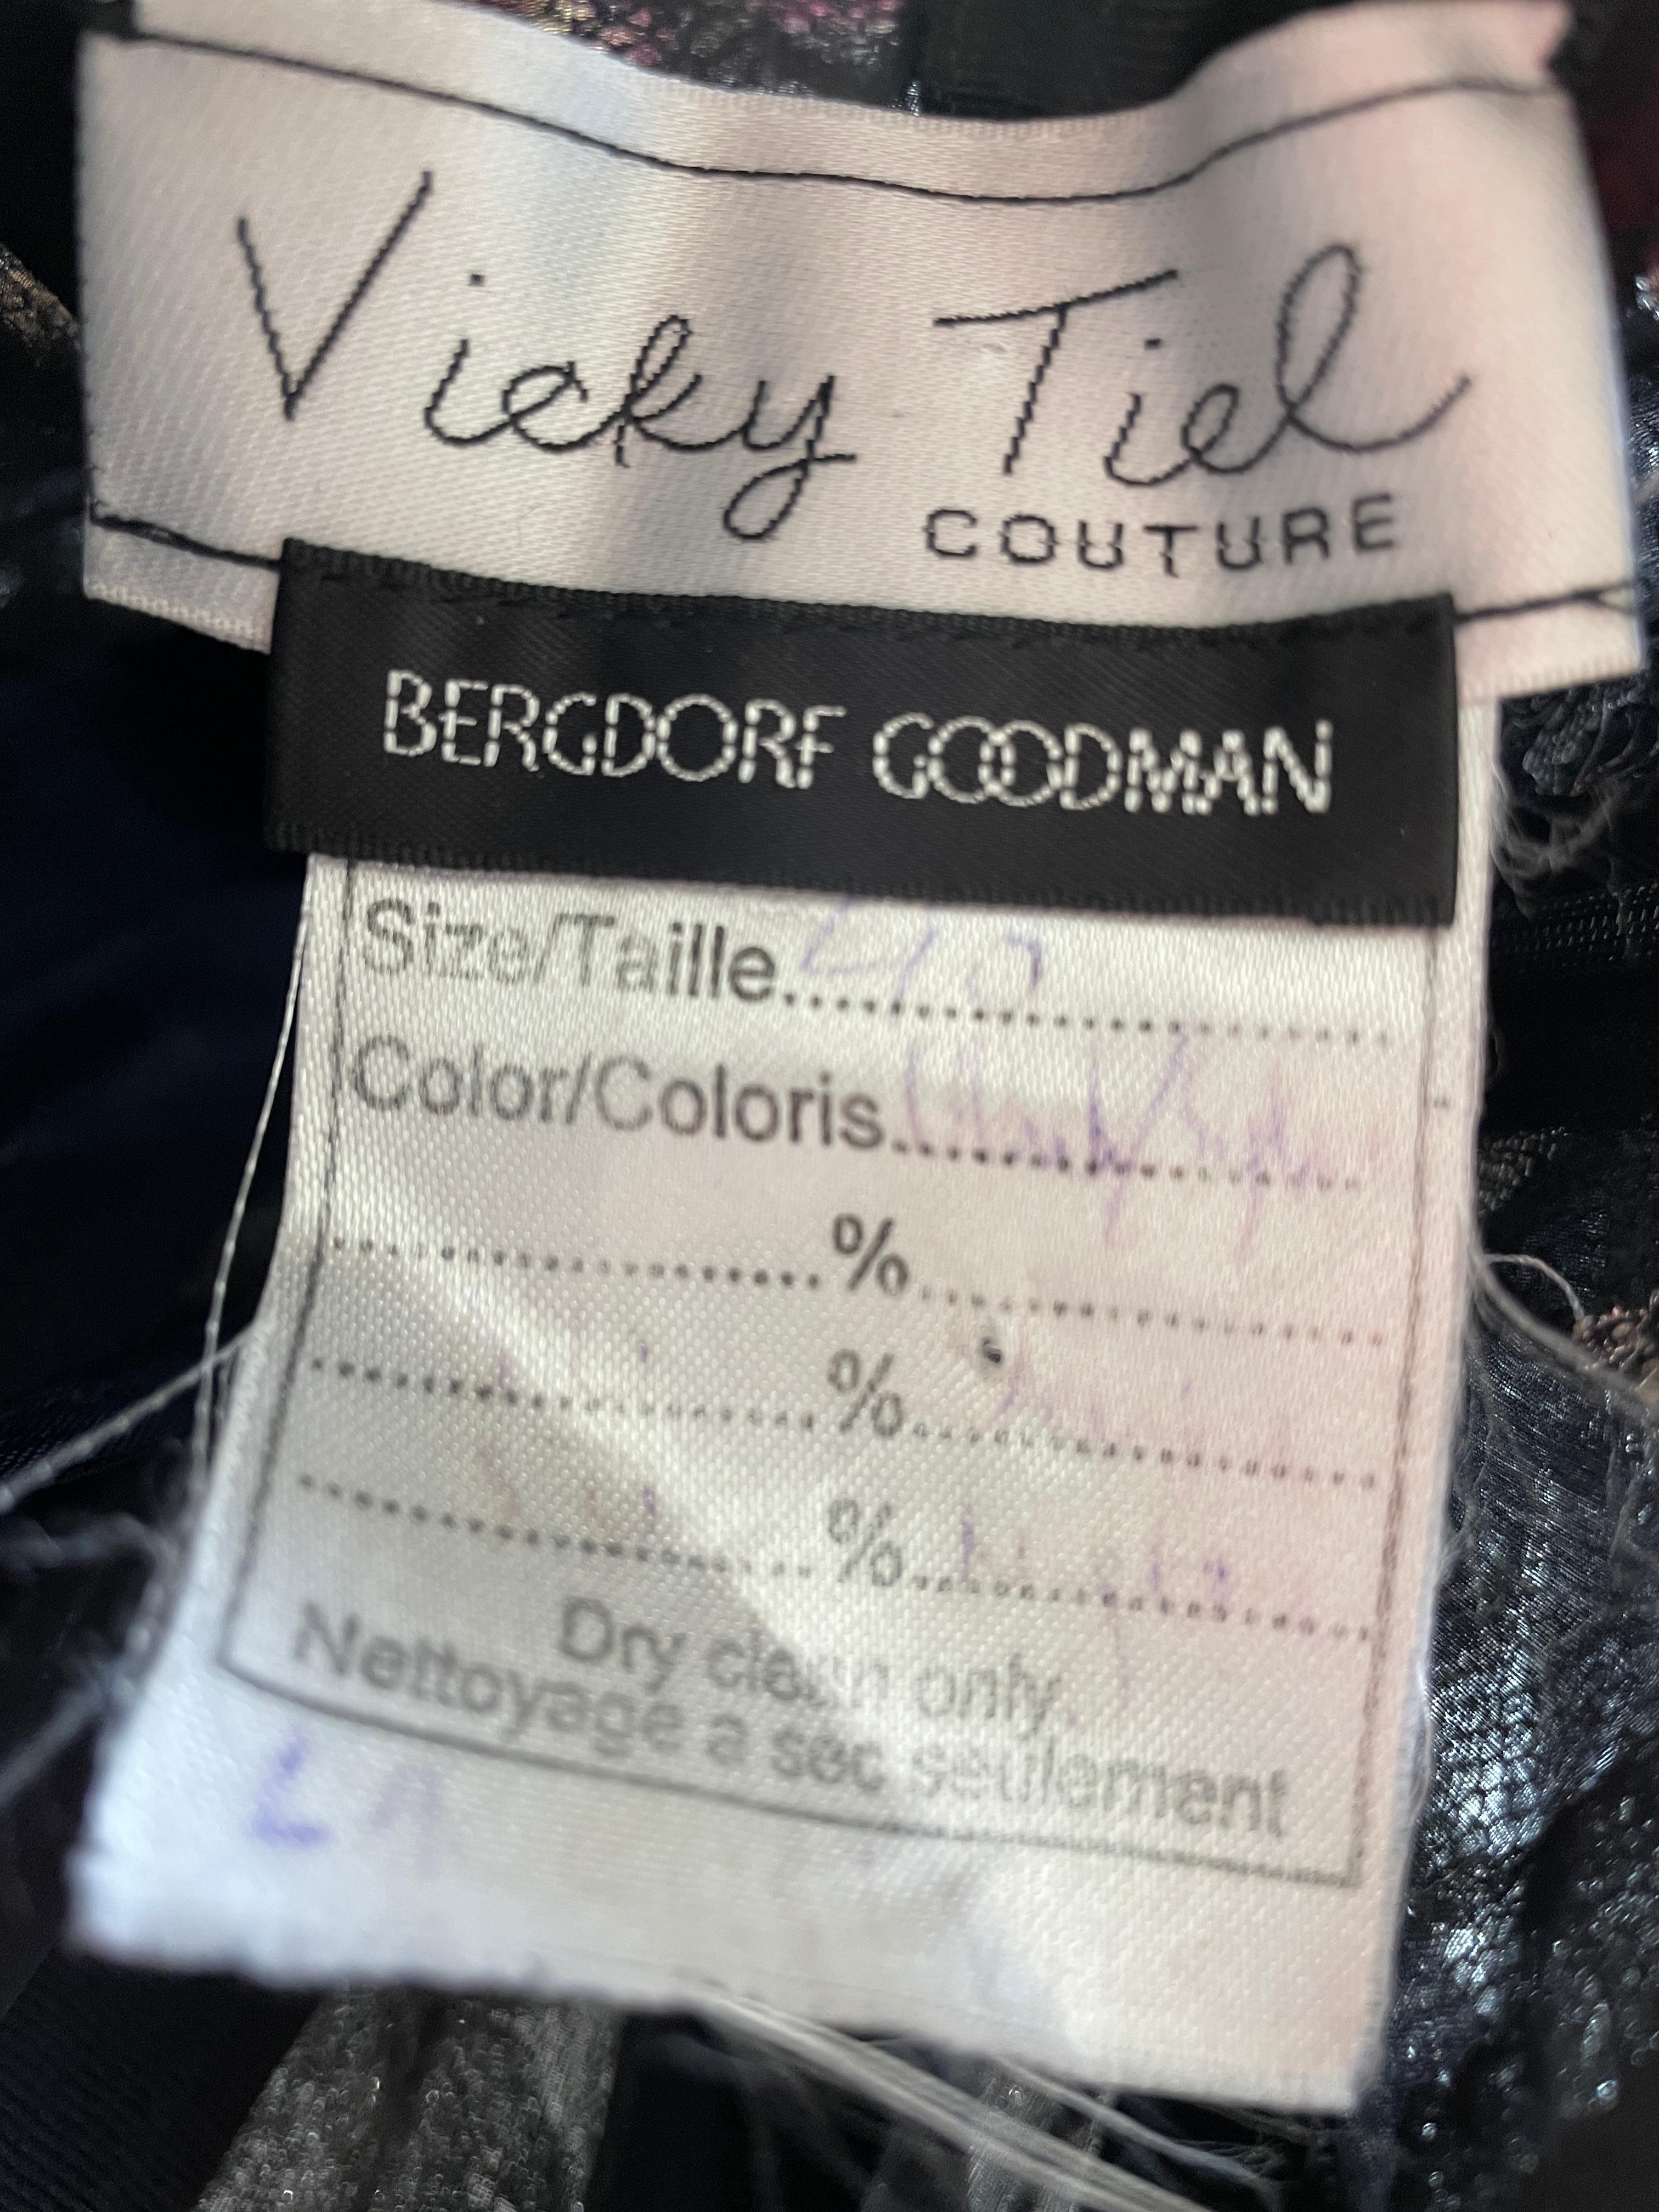 Vicky Tiel Couture Paris for Bergdorf Goodman Silver Lace Corset Cocktail Dress For Sale 3